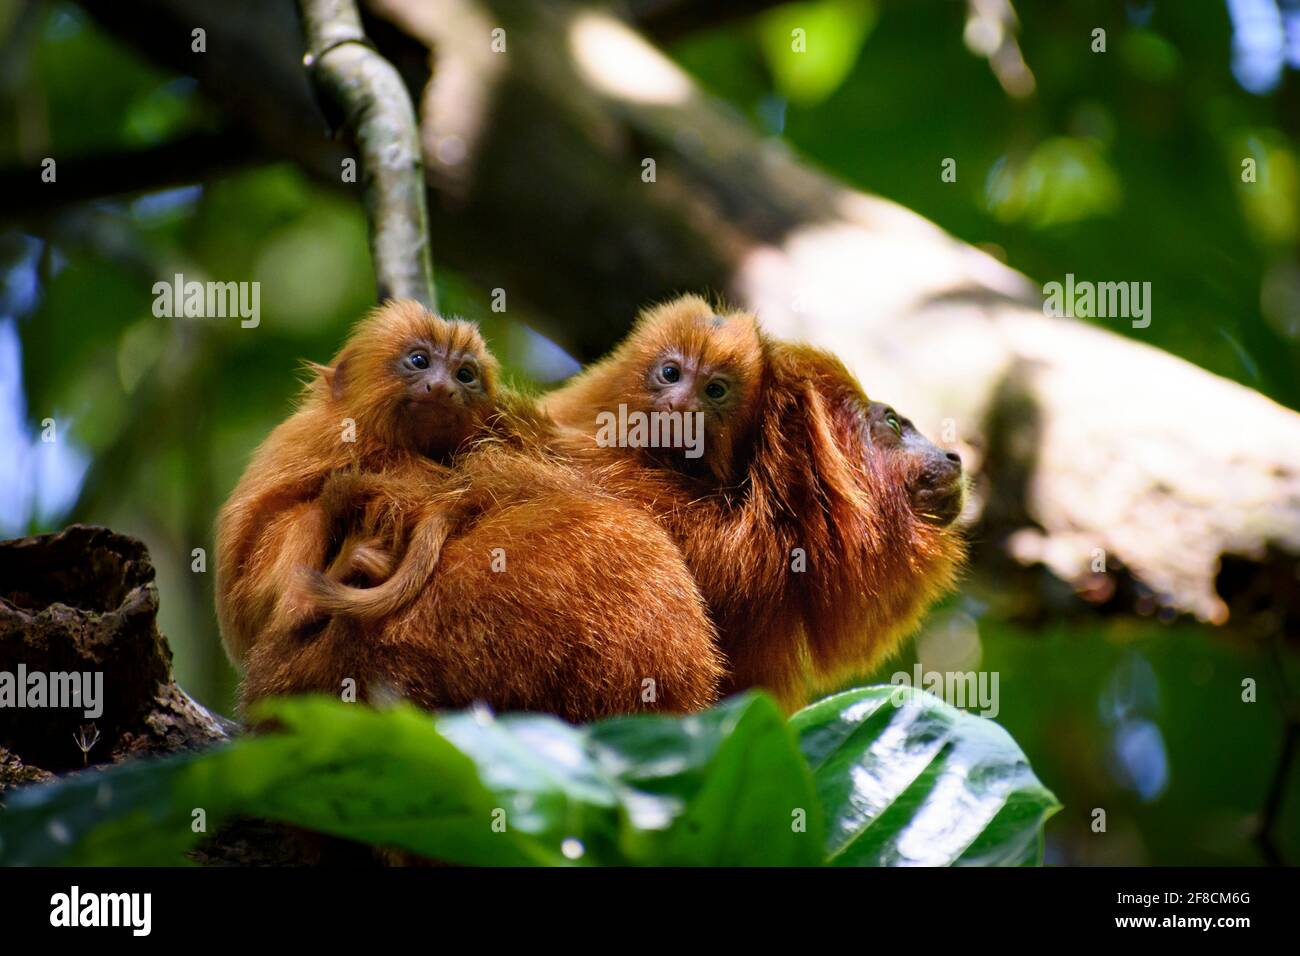 Cubs of endemic species, Golden Lion Tamarin, facing the camera Stock Photo